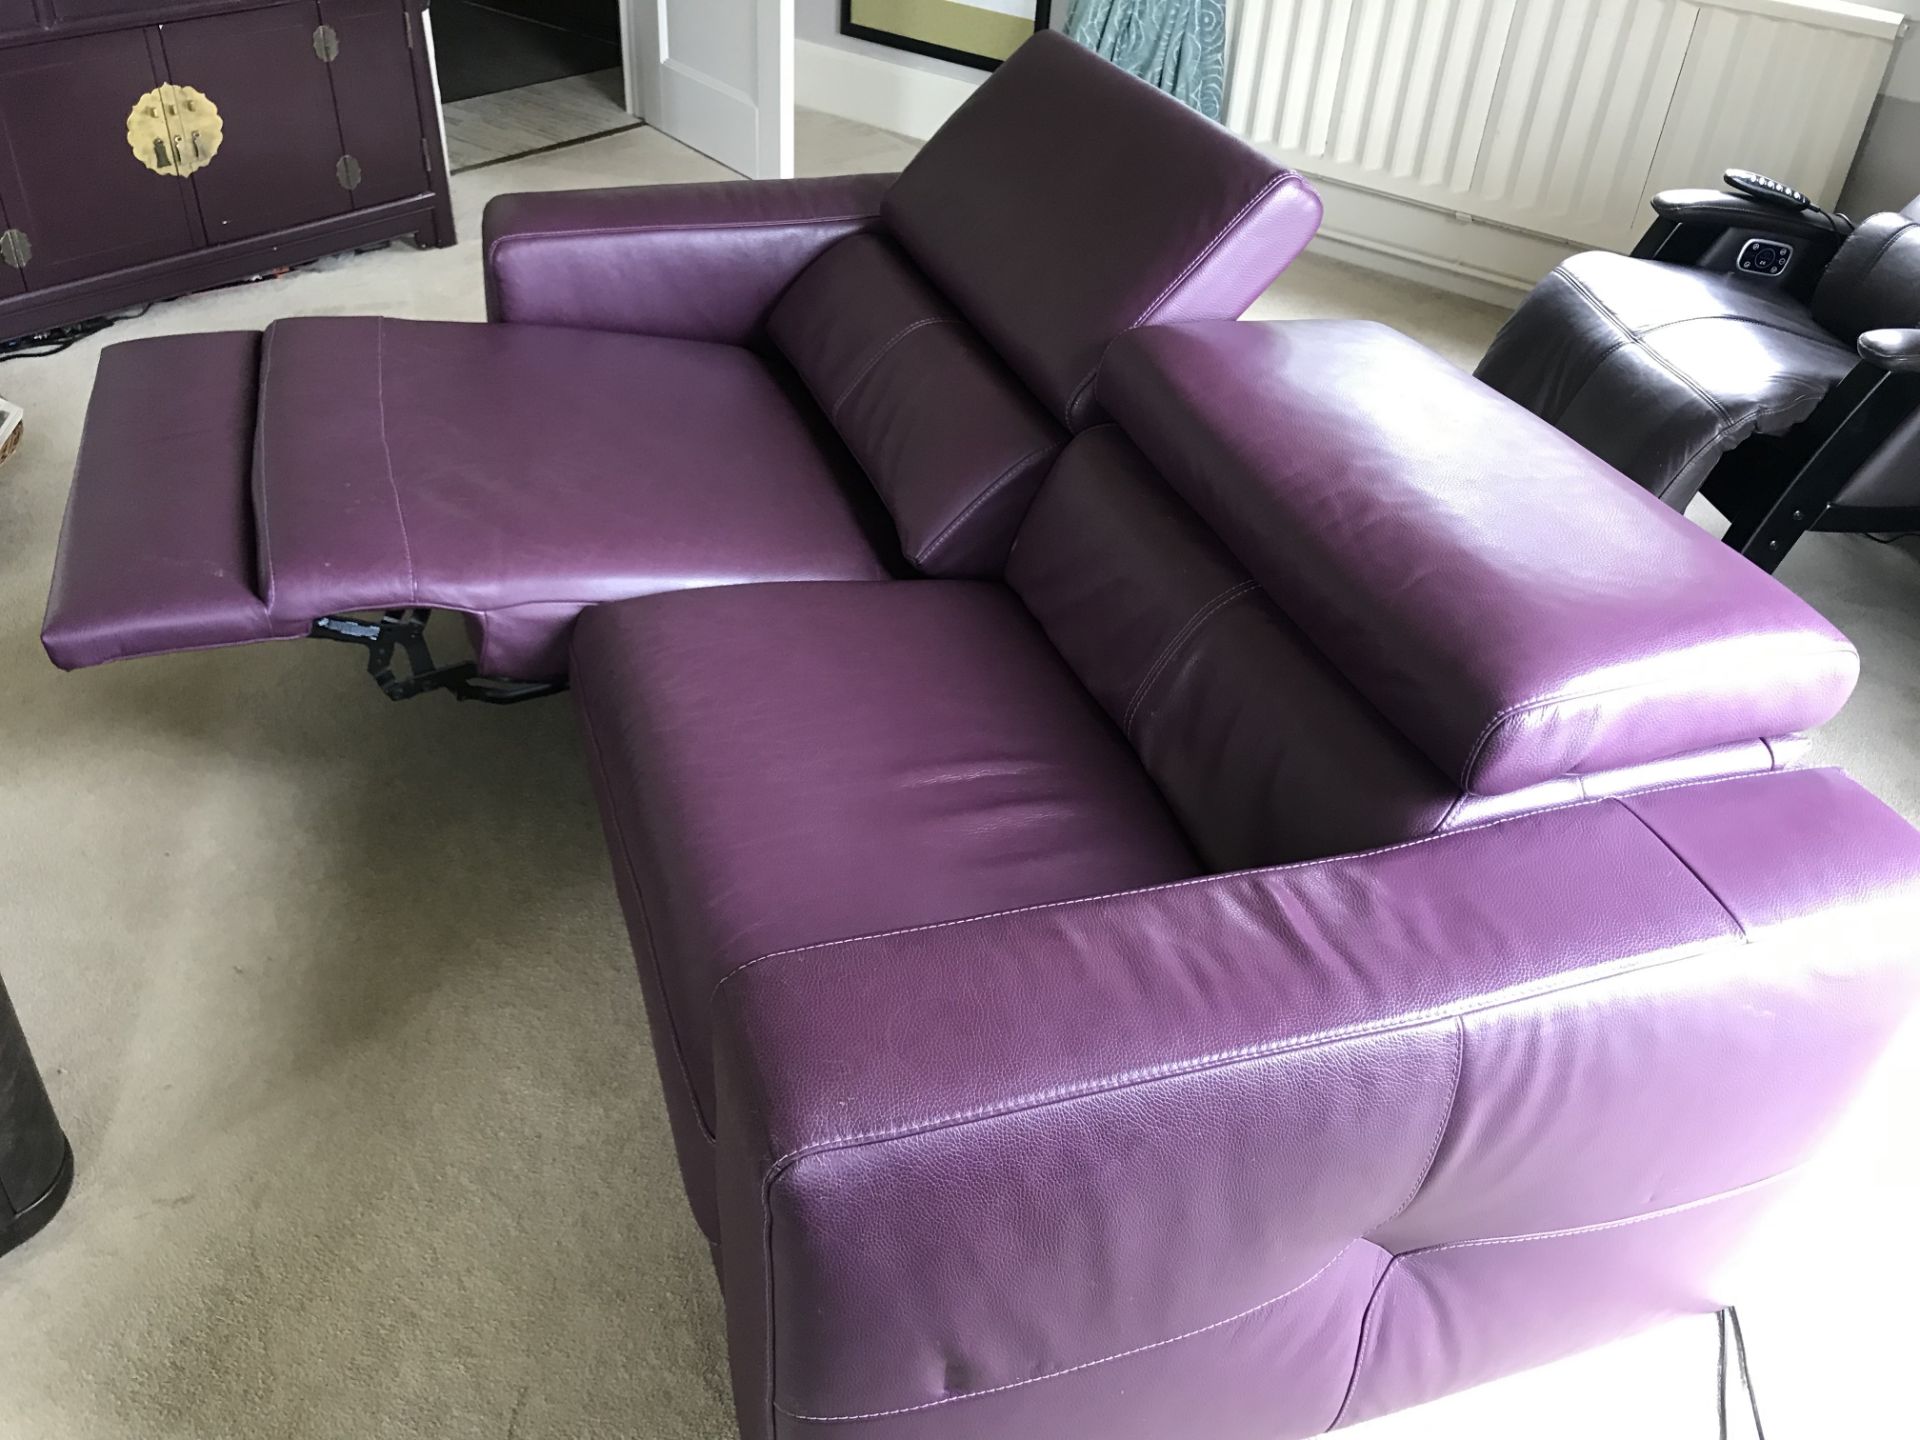 ROM Themis Modular Sofa Purple Belgian Leather Recliners With A Simplistic Yet Sophisticated Form, - Image 6 of 9